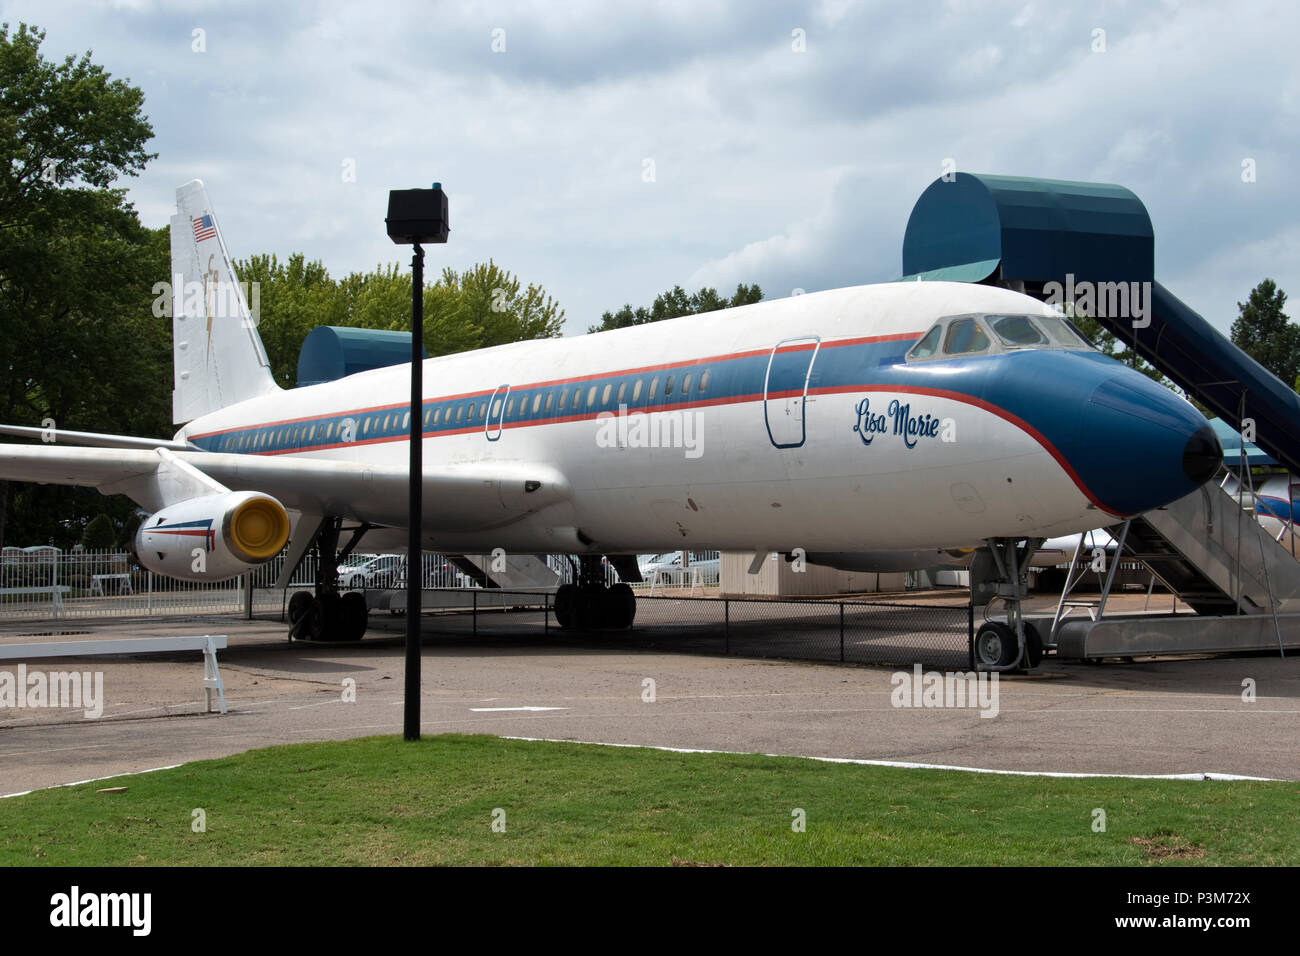 The “Lisa Marie,” a Convair 880 business jet, owned by Elvis Presley at the Graceland museum, Memphis, Tennessee. Stock Photo